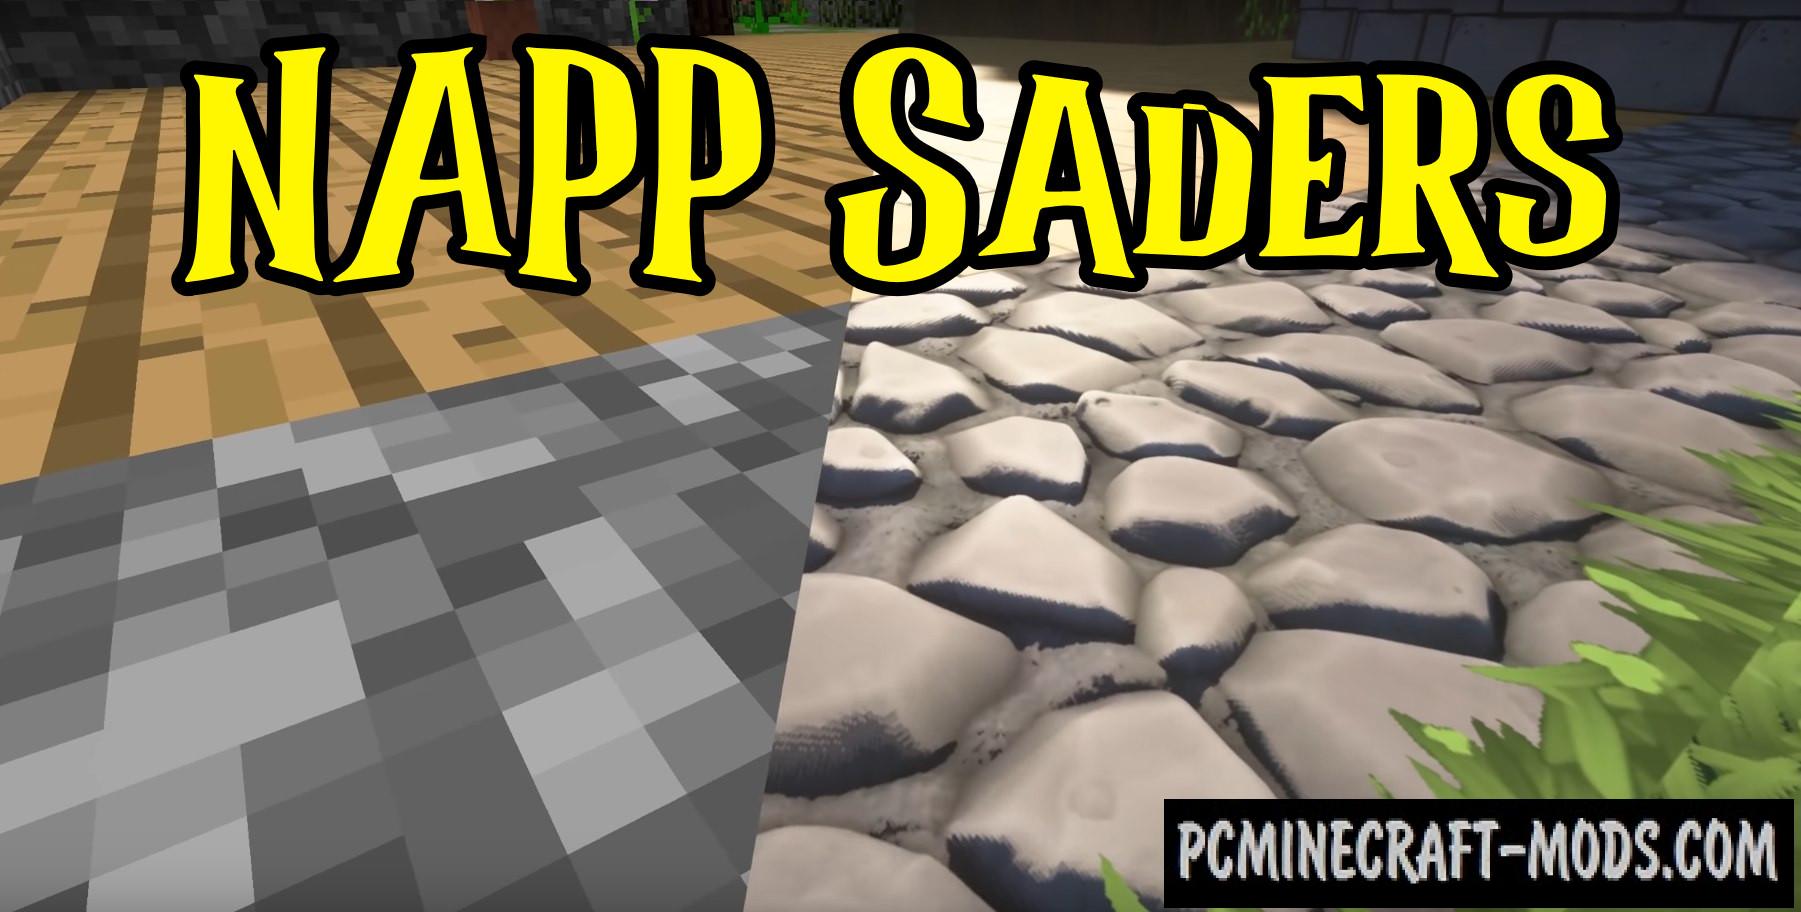 NAPP Shaders Pack For Minecraft 1.18.2, 1.17.1, 1.16.5